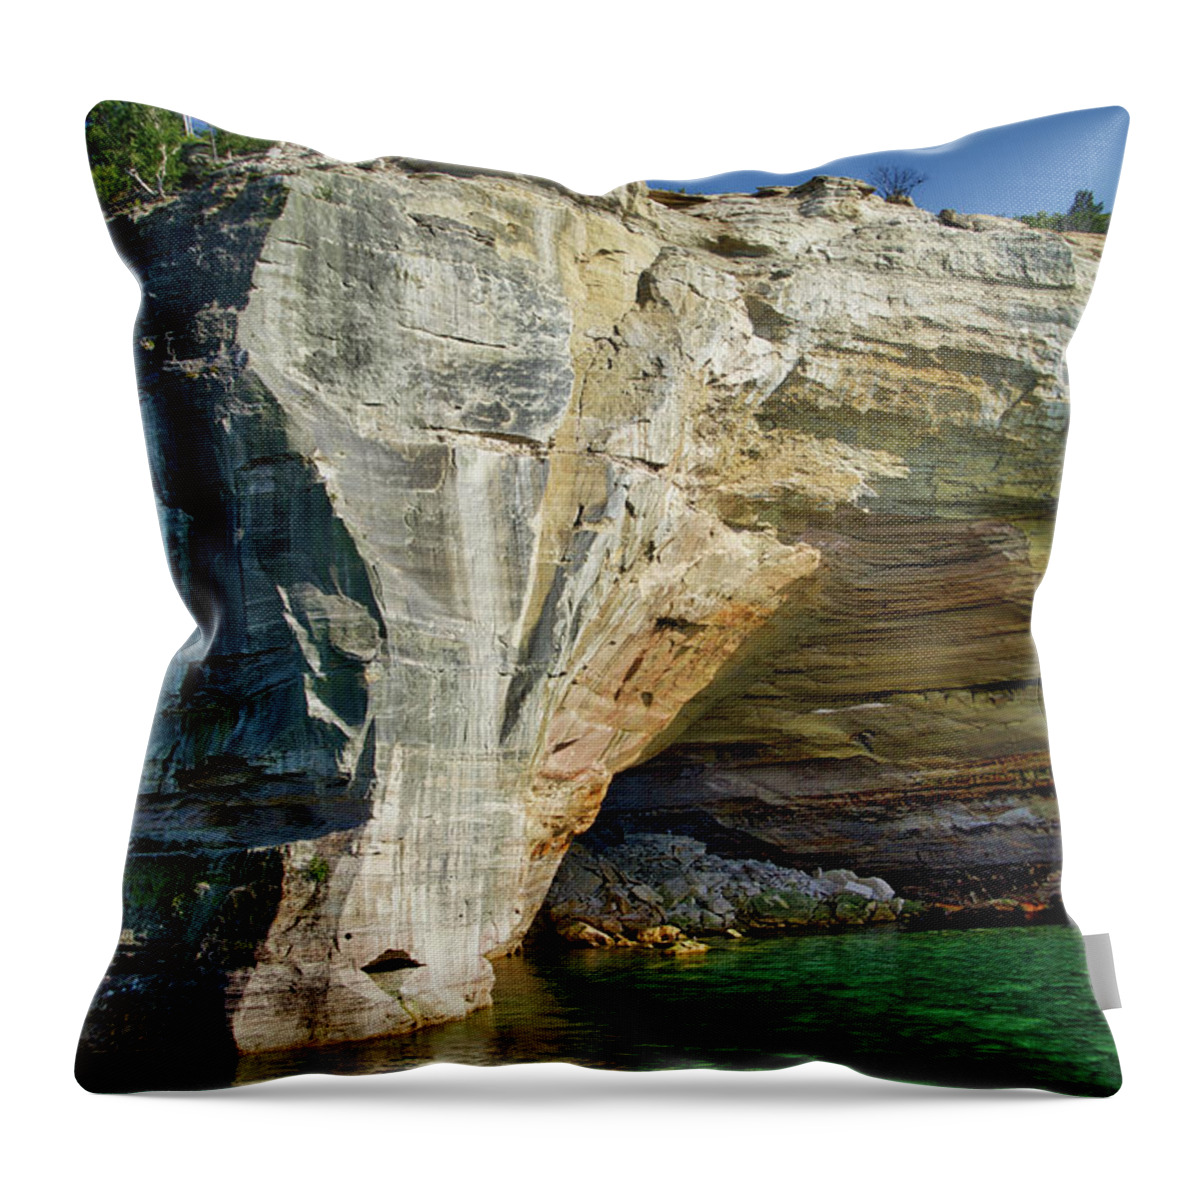 Pictured Rocks Throw Pillow featuring the photograph Pictured Rocks National Lakeshore Upper Peninsula Michigan 10 by Thomas Woolworth